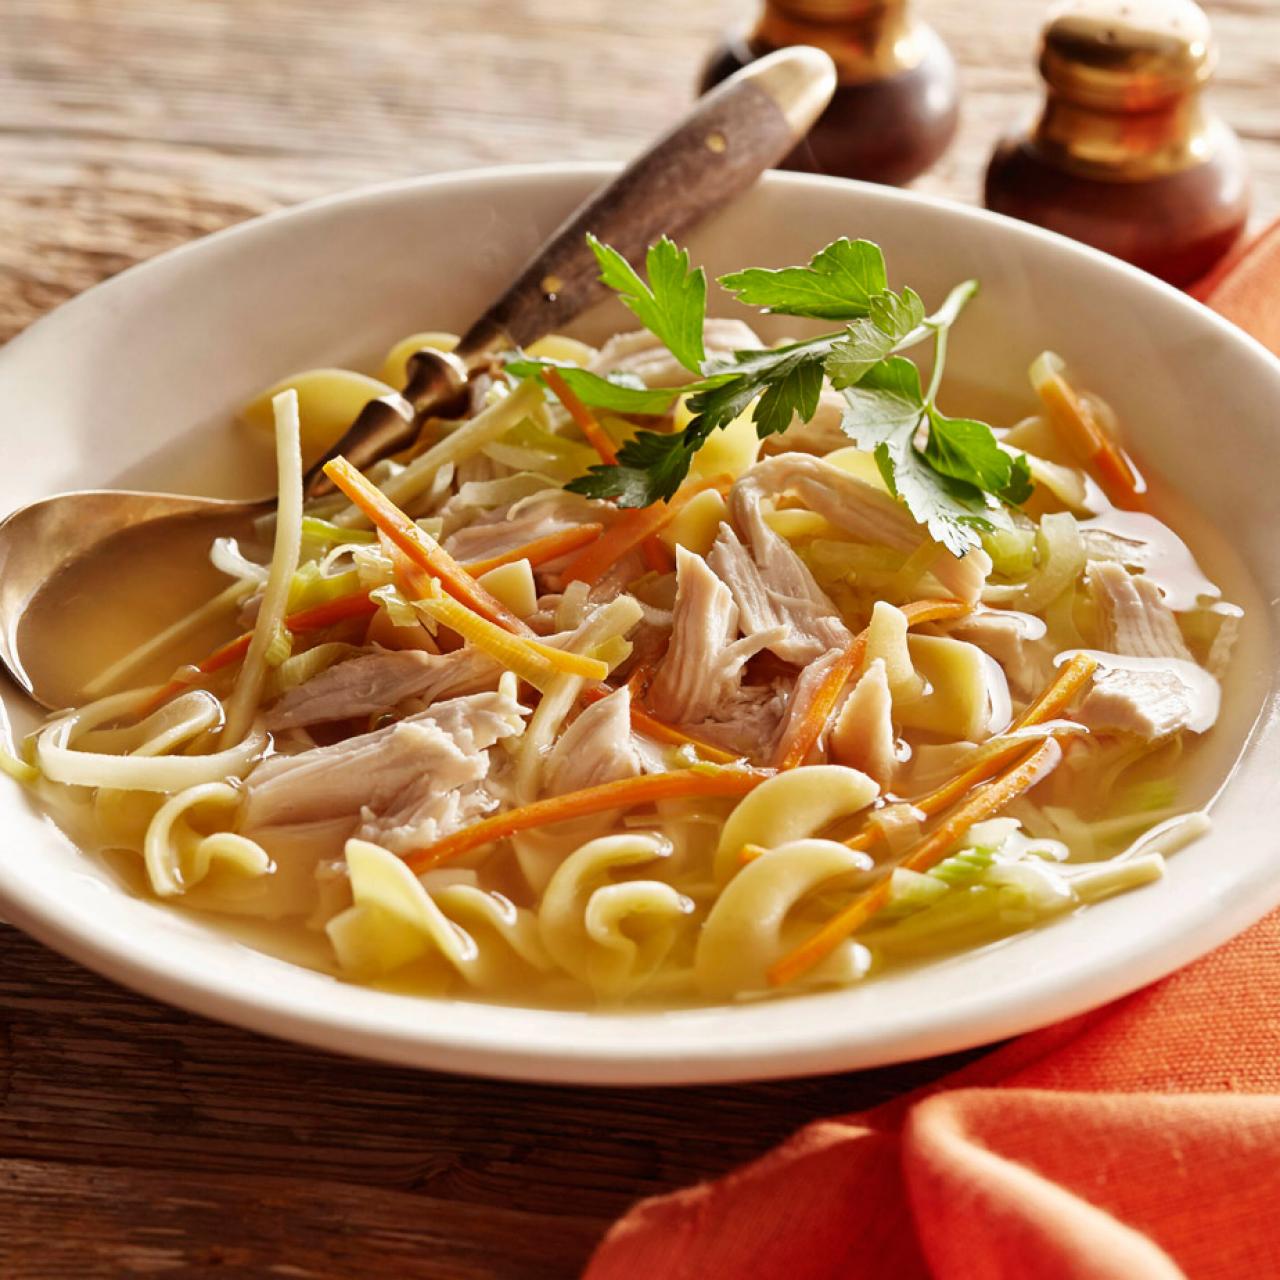 https://cook.fnr.sndimg.com/content/dam/images/cook/fullset/2012/8/23/2/CCWID116_Suped-up-Traditional-Chicken-Noodle-Soup_s4x3.jpg.rend.hgtvcom.1280.1280.suffix/1386025606828.jpeg